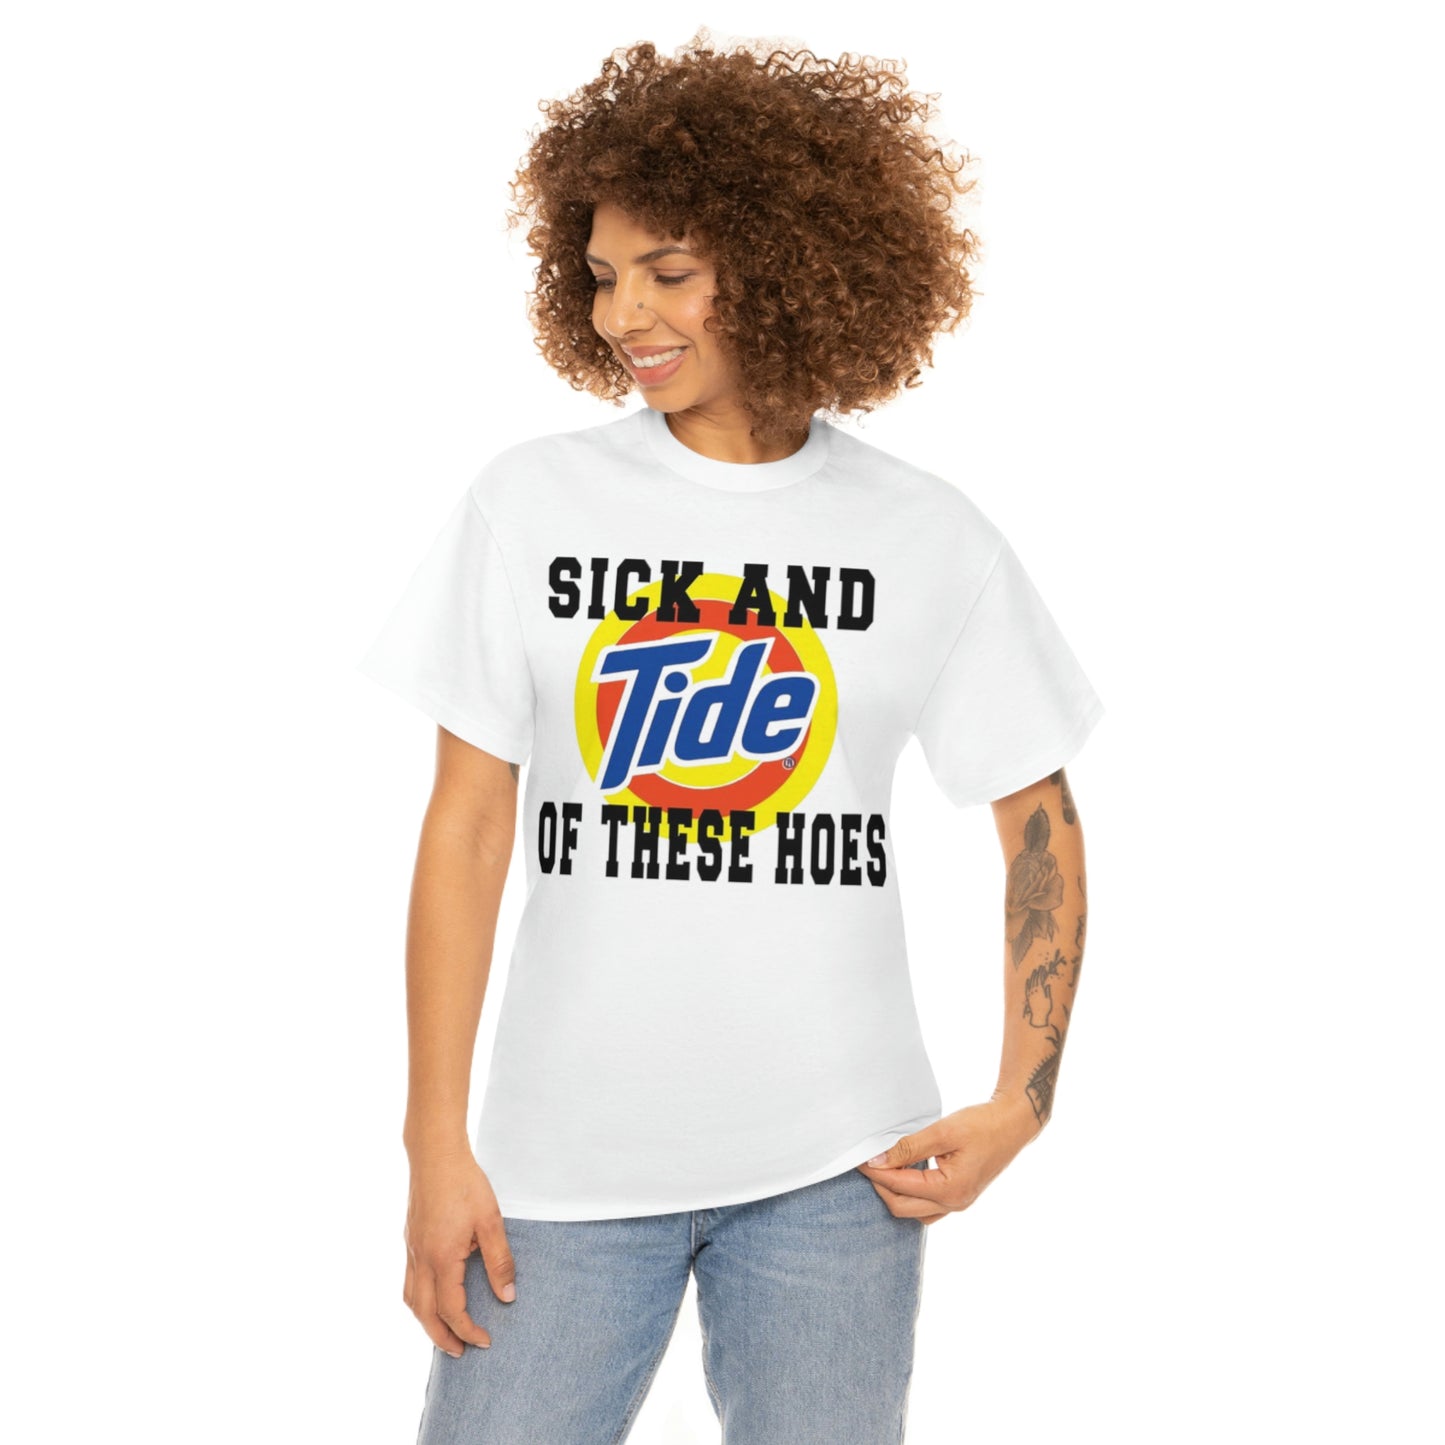 Sick And Tide Tee